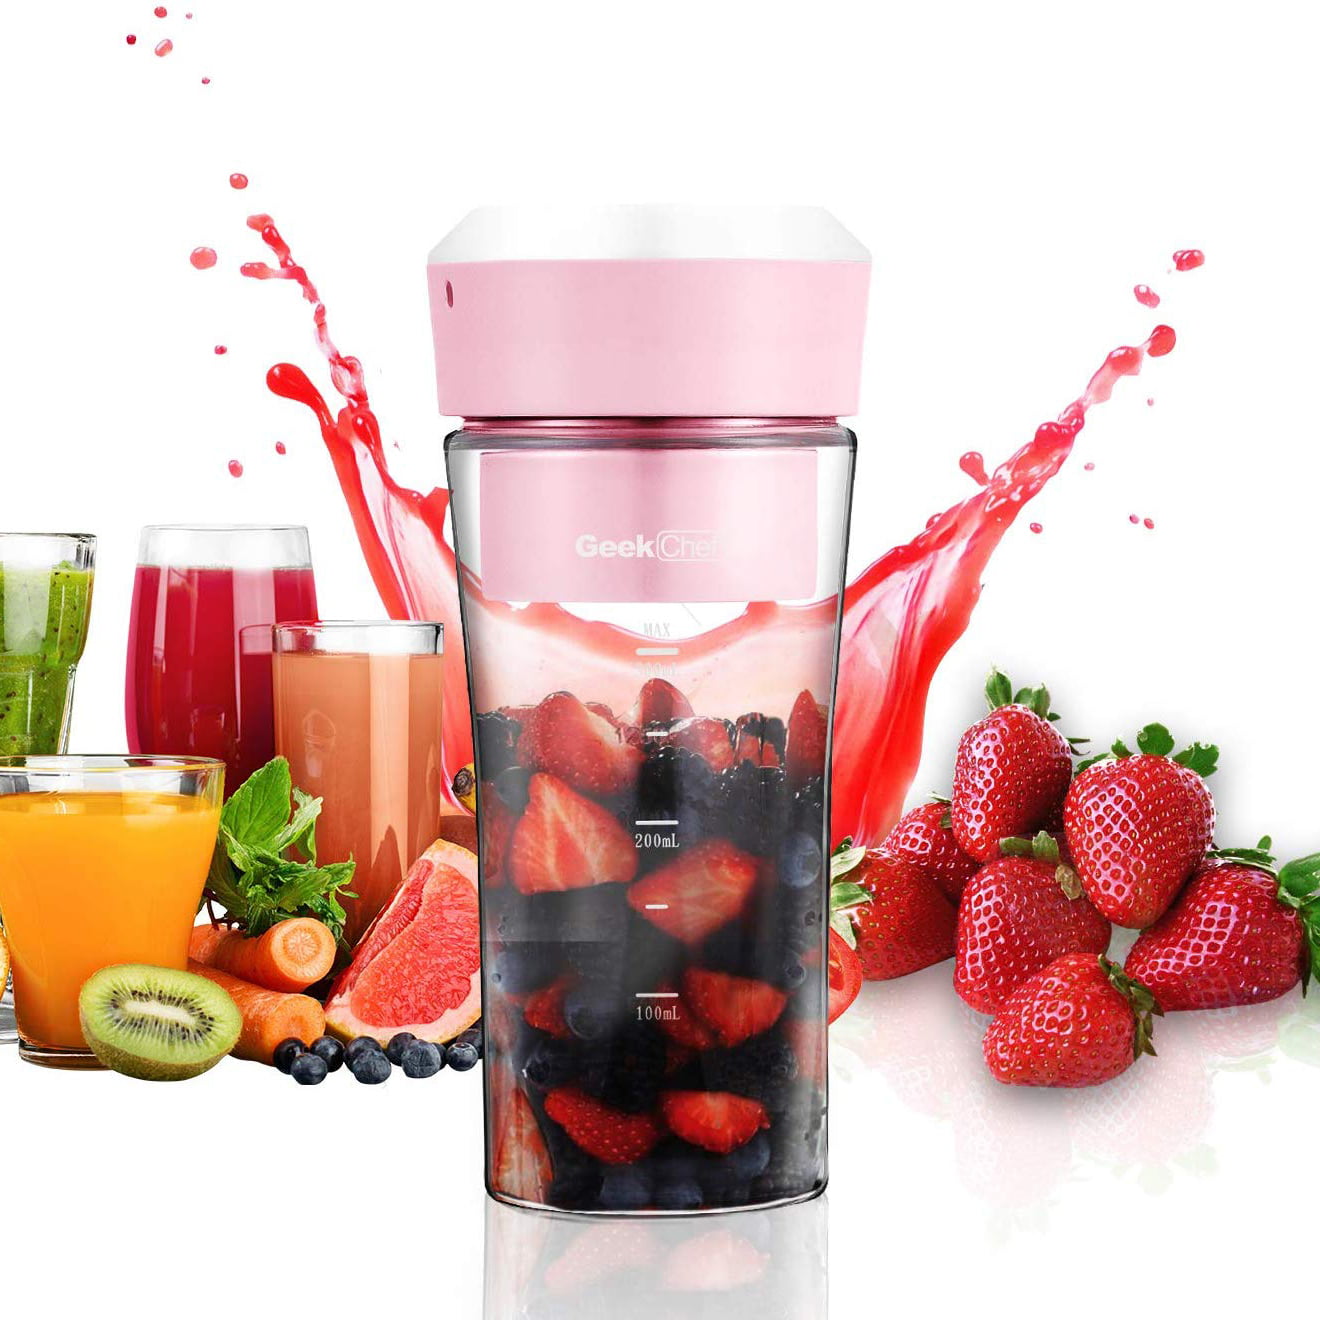 Mixing Machine BPA Free PB-L01 Portable Blender Geek Chef USB Fruit Juicer Mini Personal Blender Small Blender Shake and Smoothie Rechargeable Mixer Waterproof Juicer Cup 